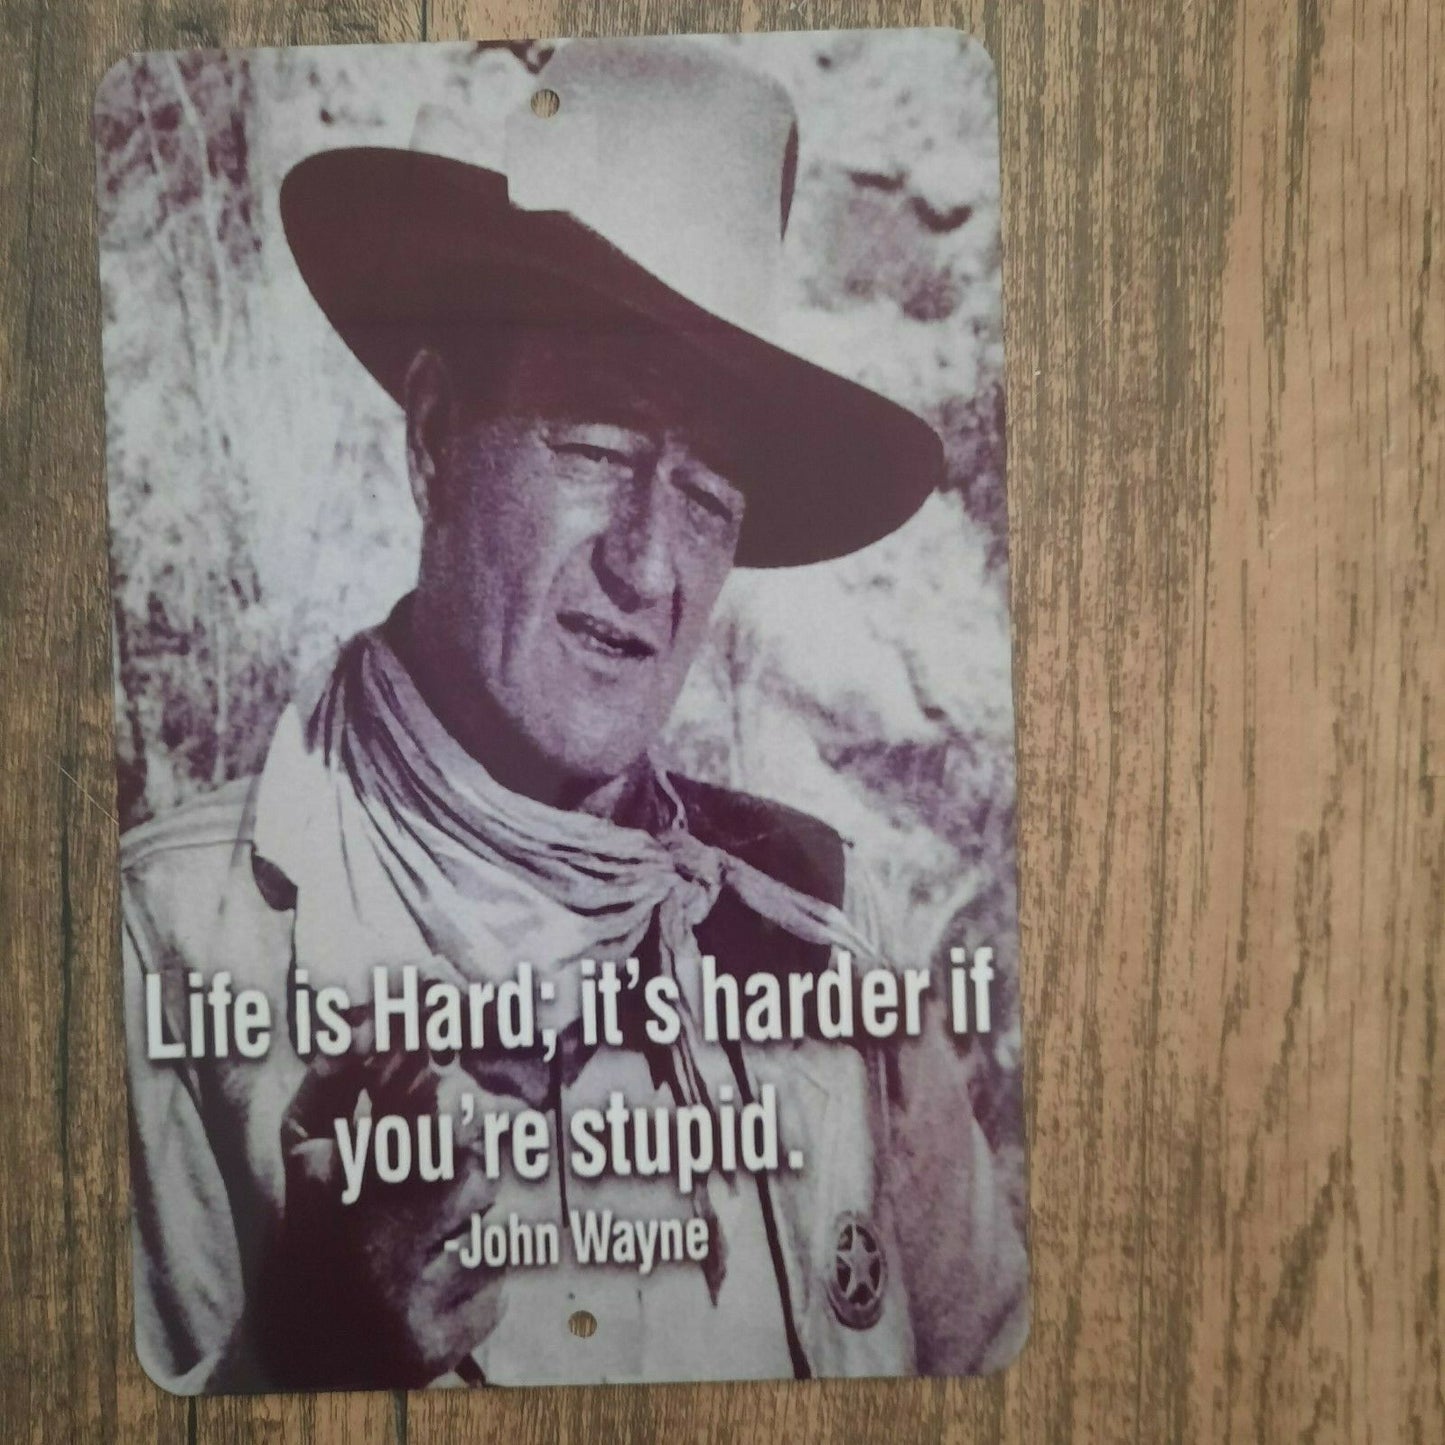 John Wayne Life is Harder if You're Stupid 8x12 Metal Wall Sign Movie Poster Quotes Phrases Western